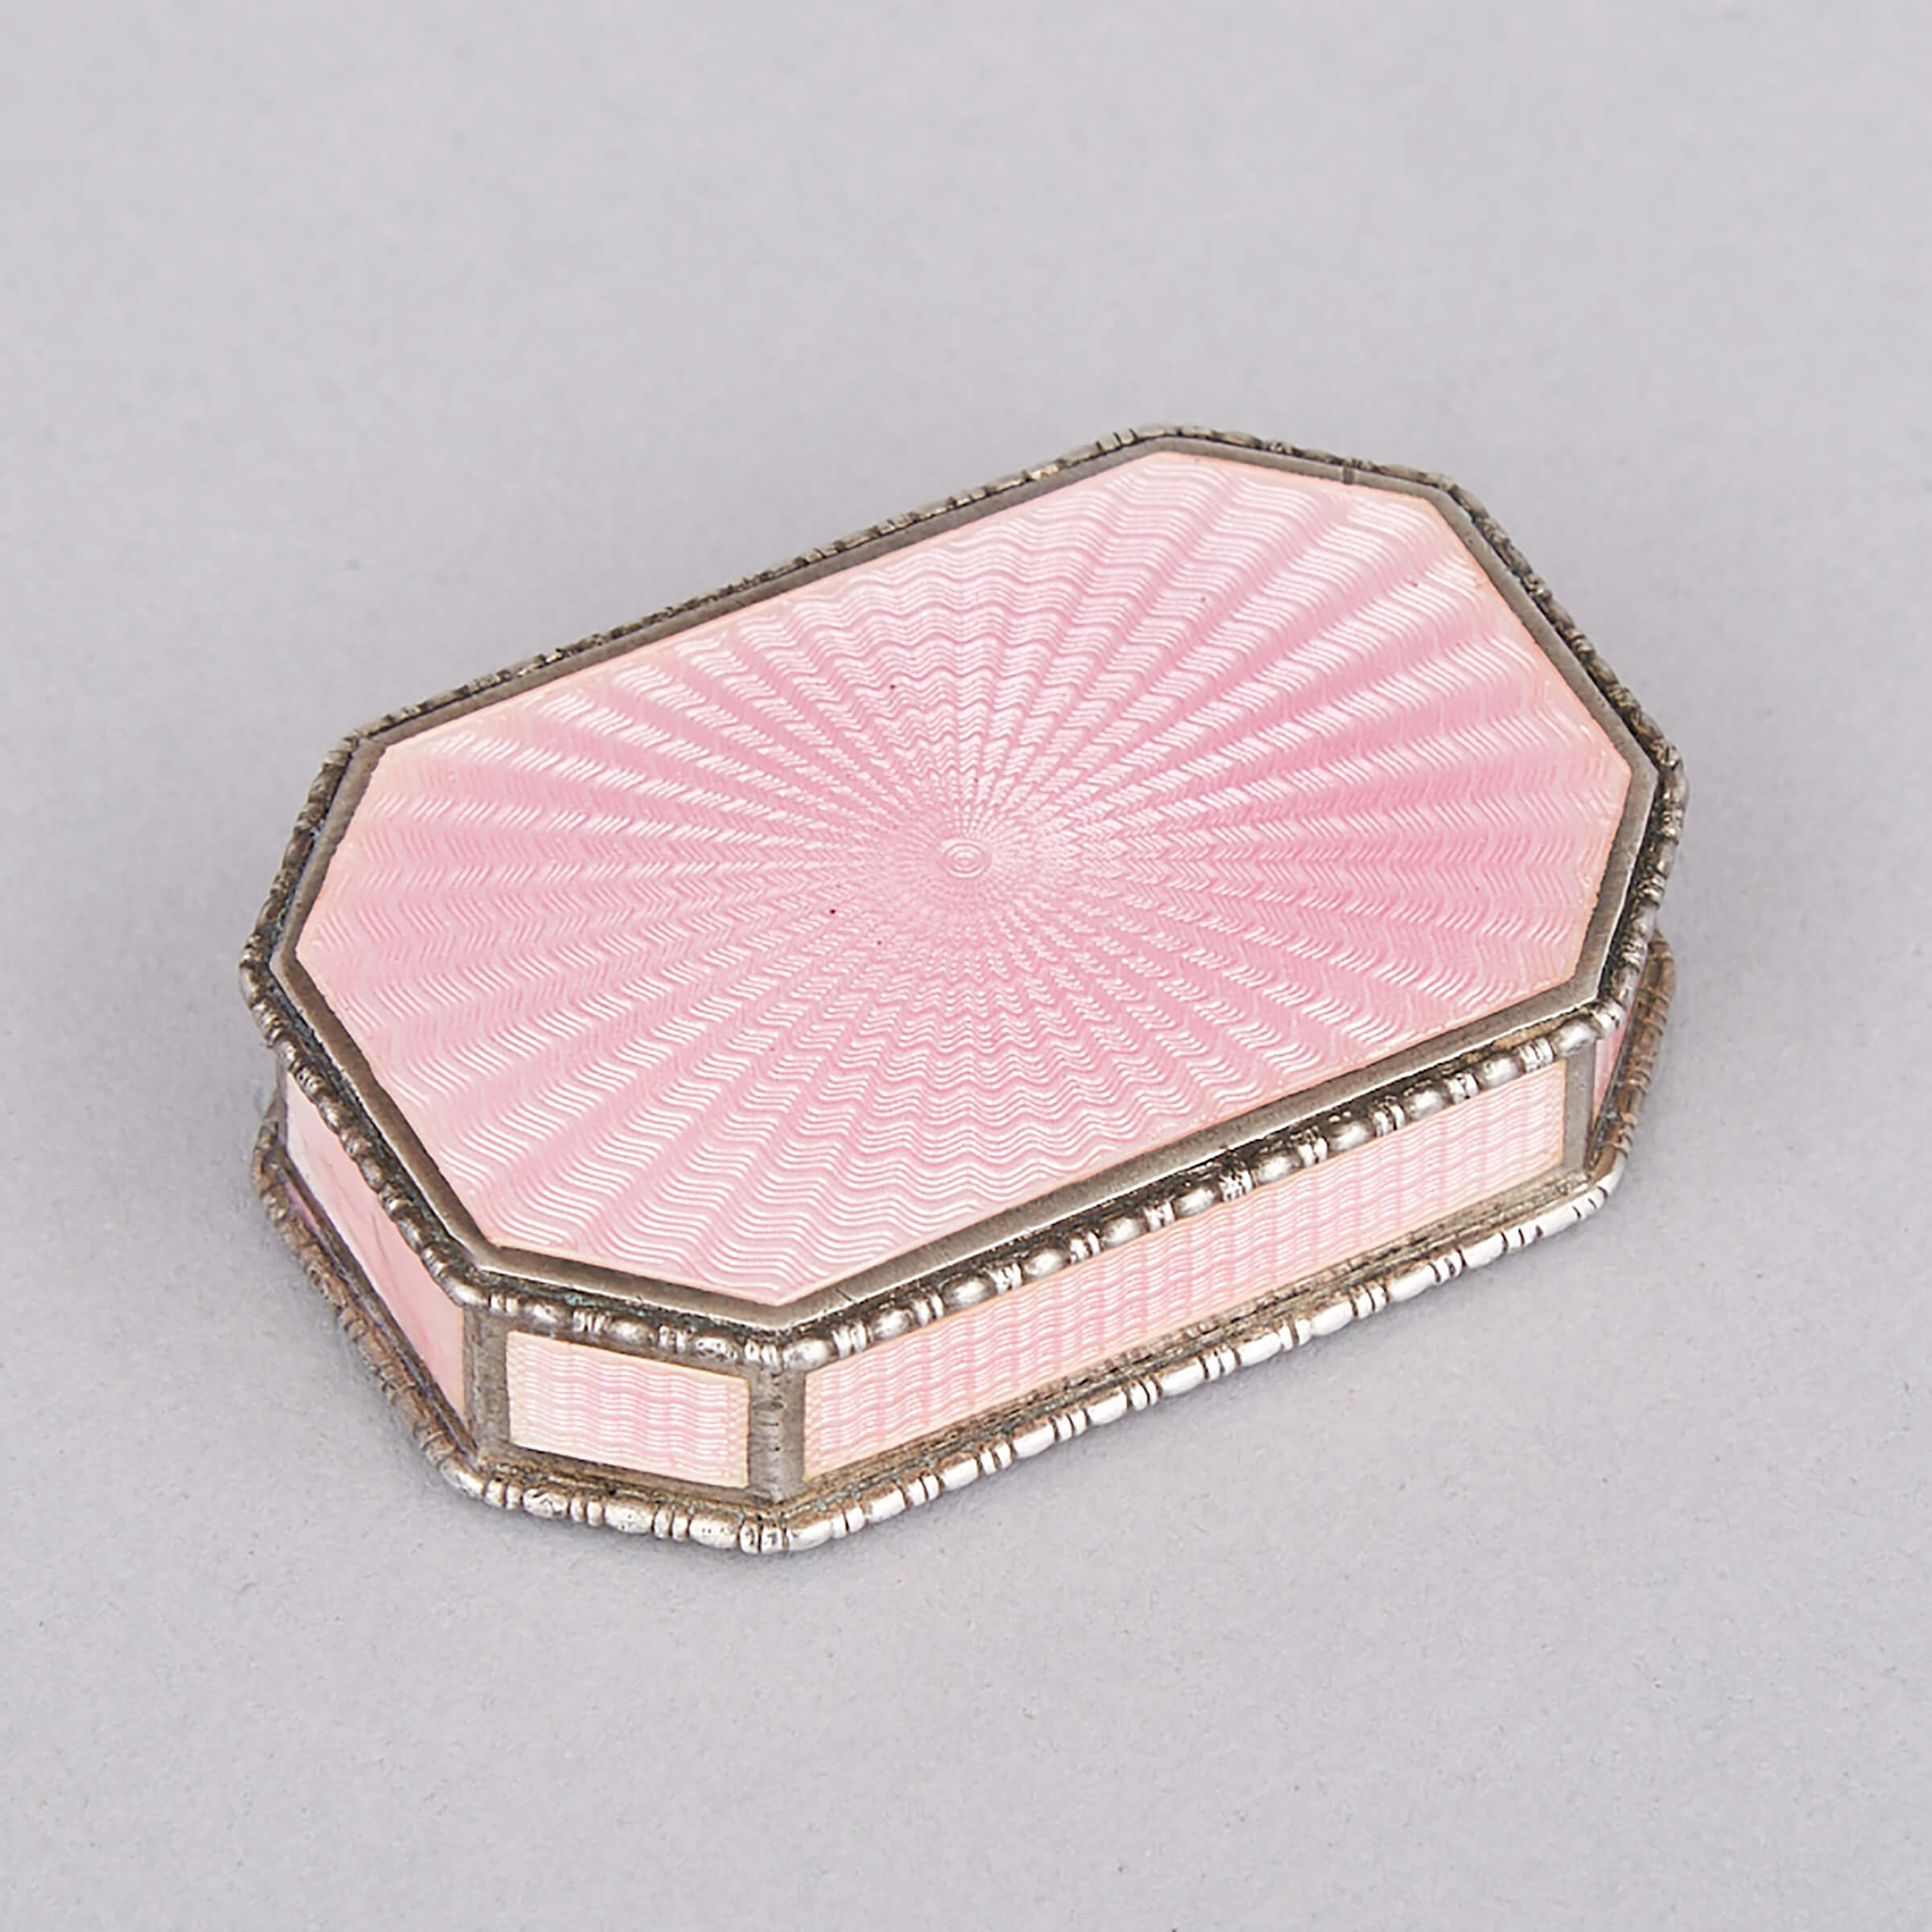 Austrian Silver and Pink Guilloche Enamel Octagonal Box, early 20th century